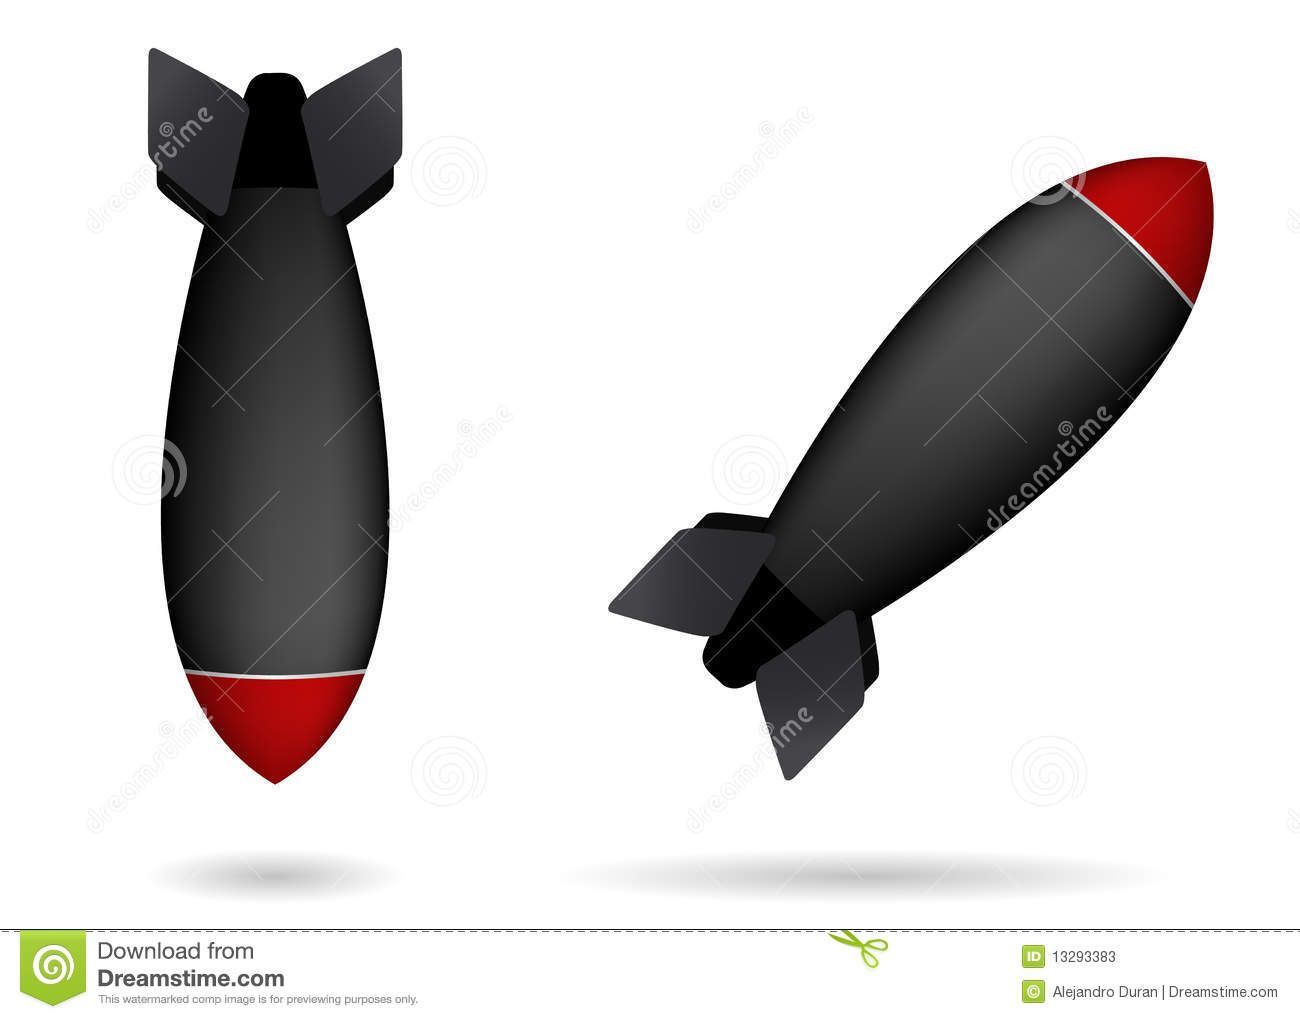 Nuclear Missiles Clipart.